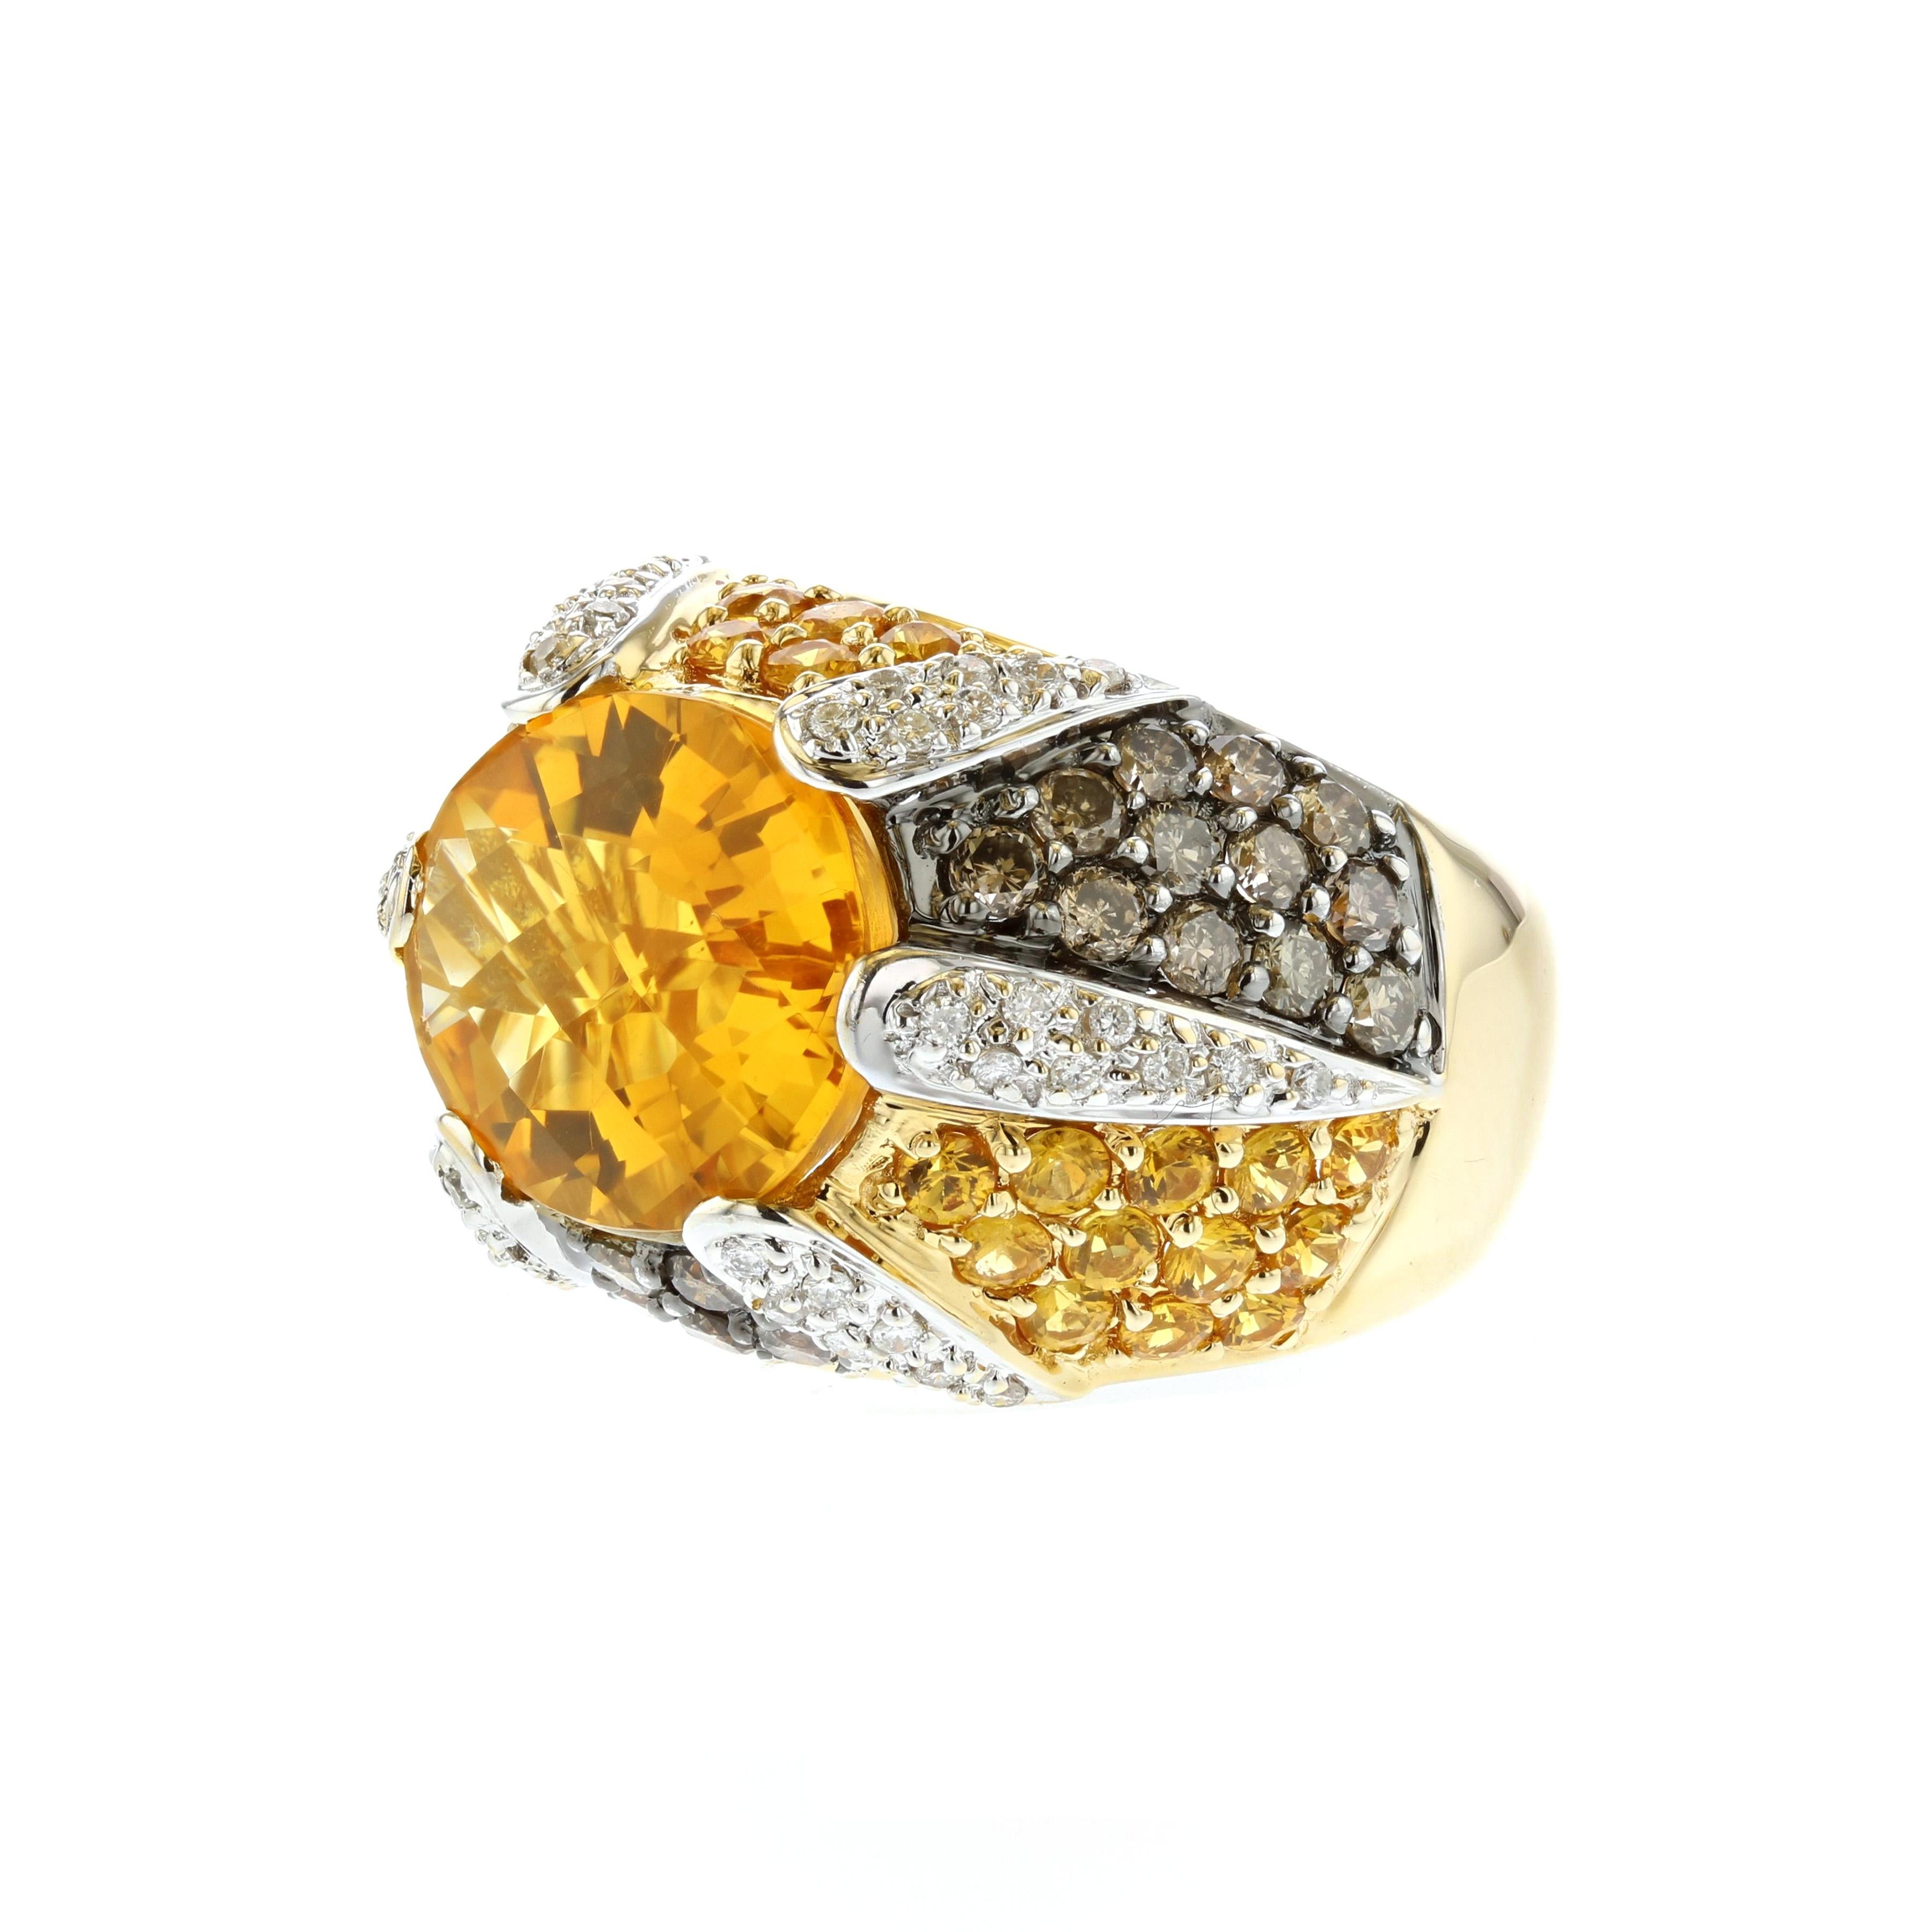 18K yellow gold ring featuring one oval citrine that totals 6.70 carats.  In addition, there are twenty-nine round yellow sapphires that total 1.75 carats, twenty-nine (29) round brown diamonds that total 1.45 carats and forty-four round brilliant